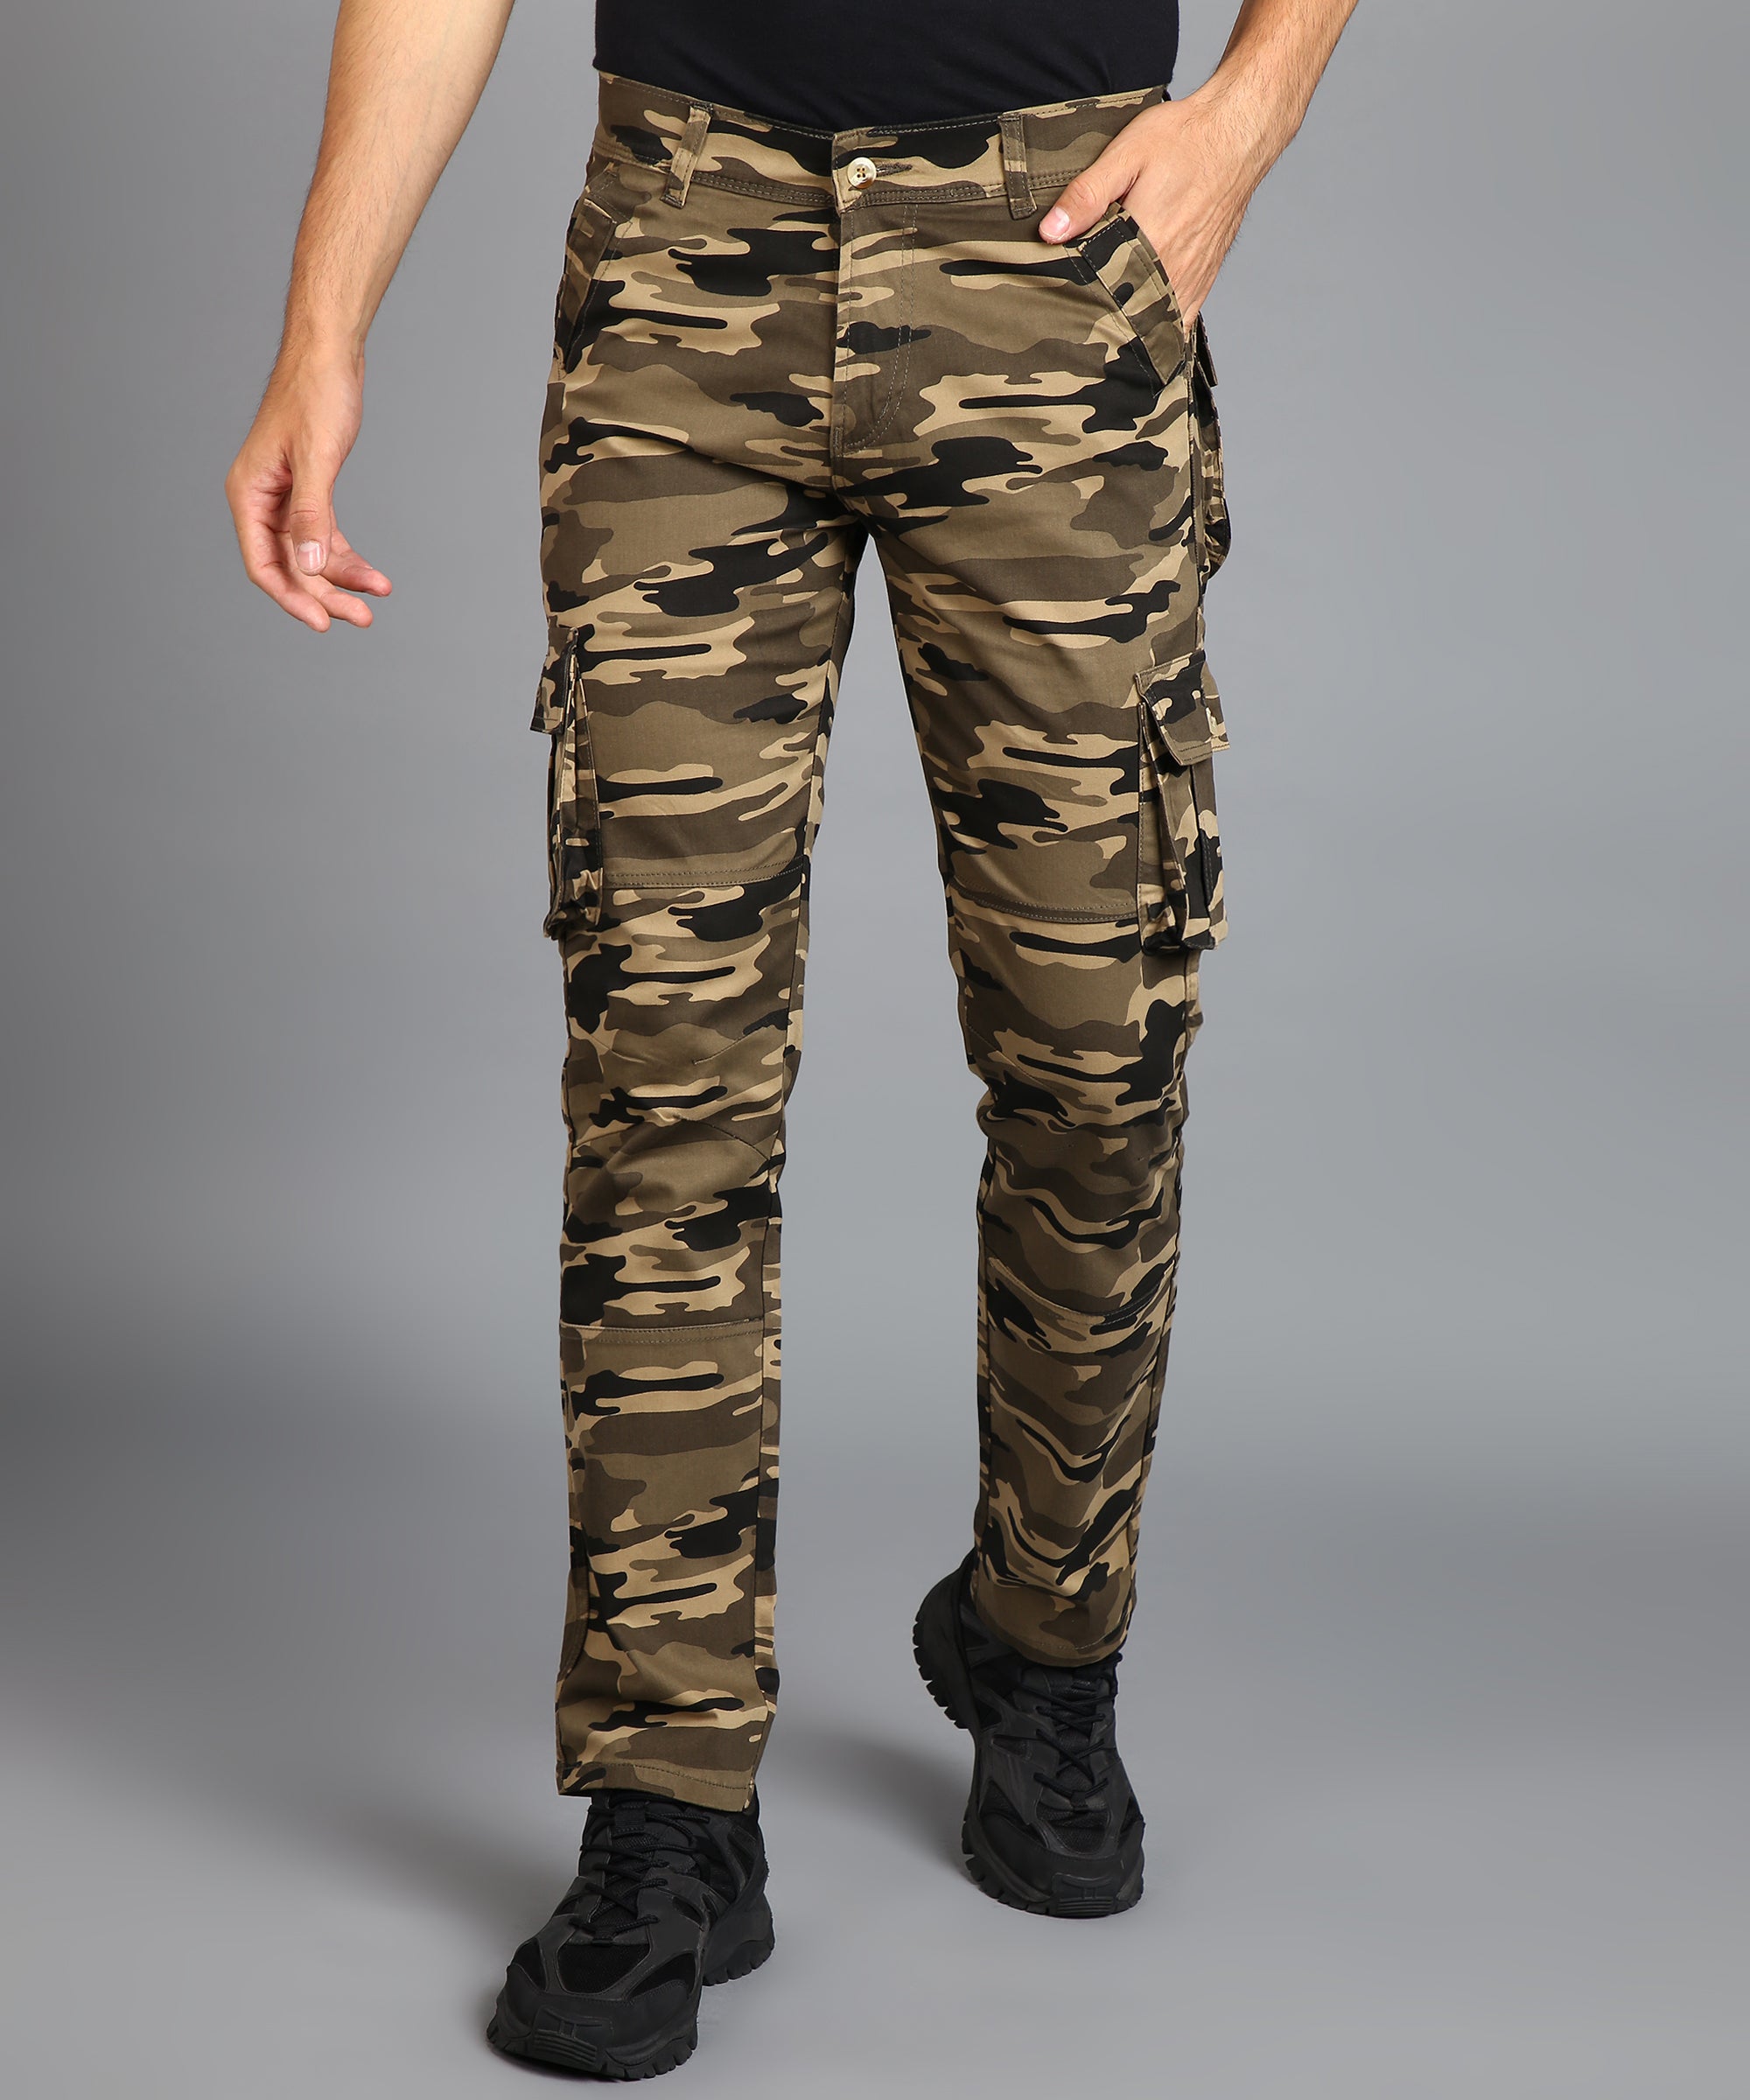 Men's Khaki Regular Fit Military Camouflage Cargo Chino Pant with 6 Pockets